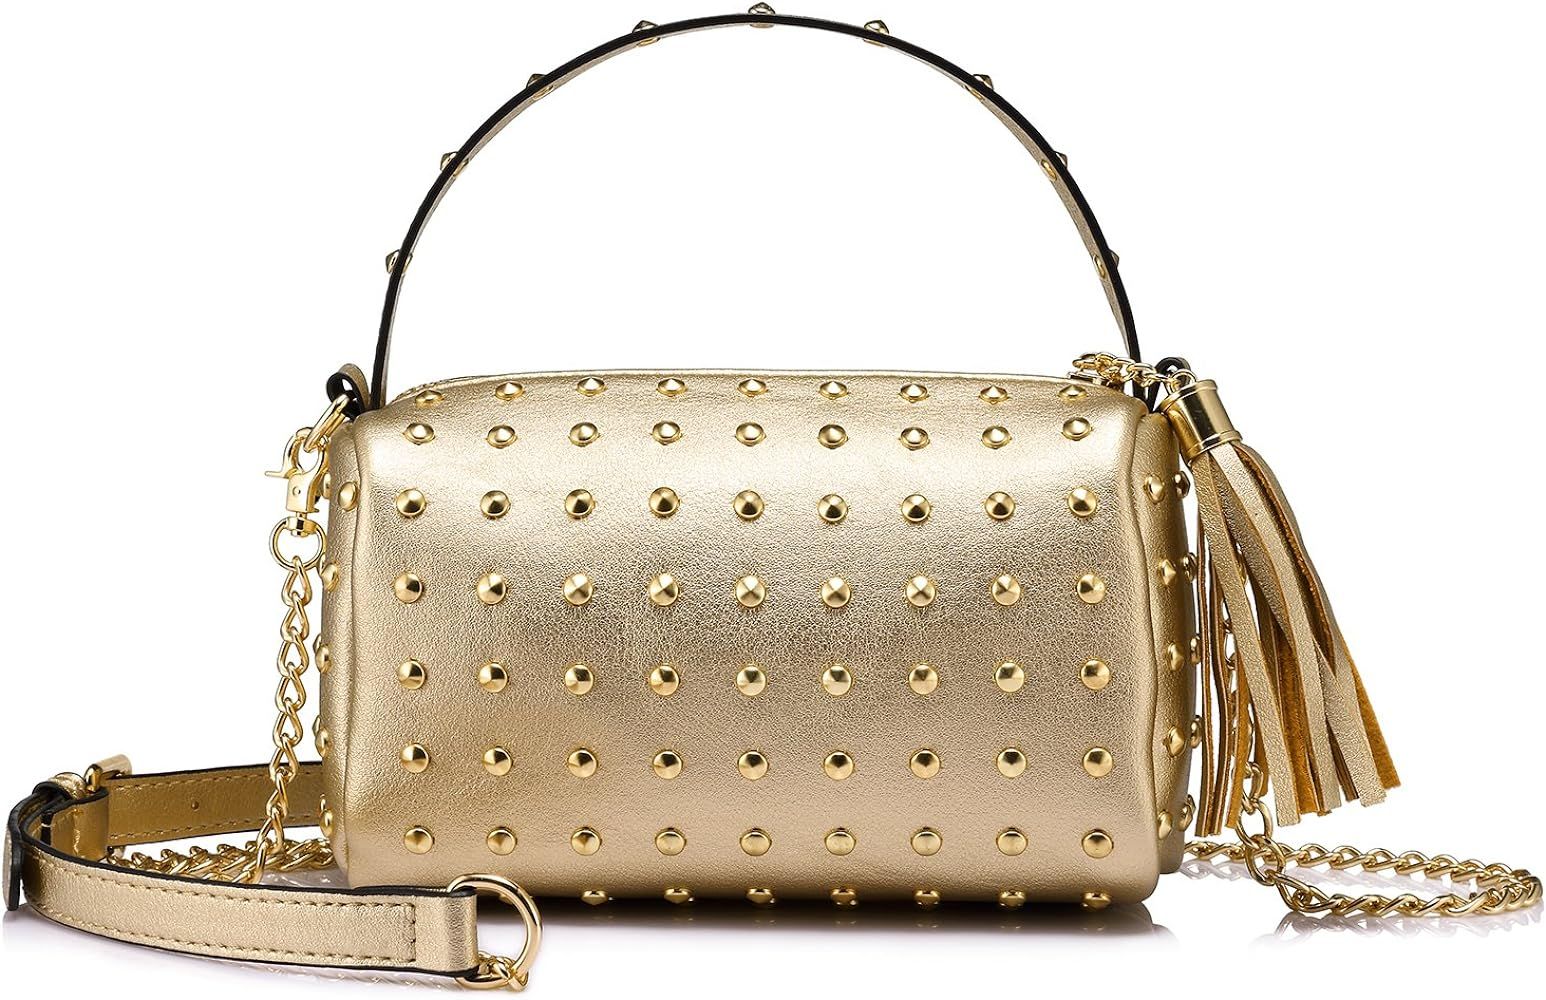 LOVEVOOK Shoulder Bag Small Side Purse Mini Clutch with Bling Rivets | Amazon (US)